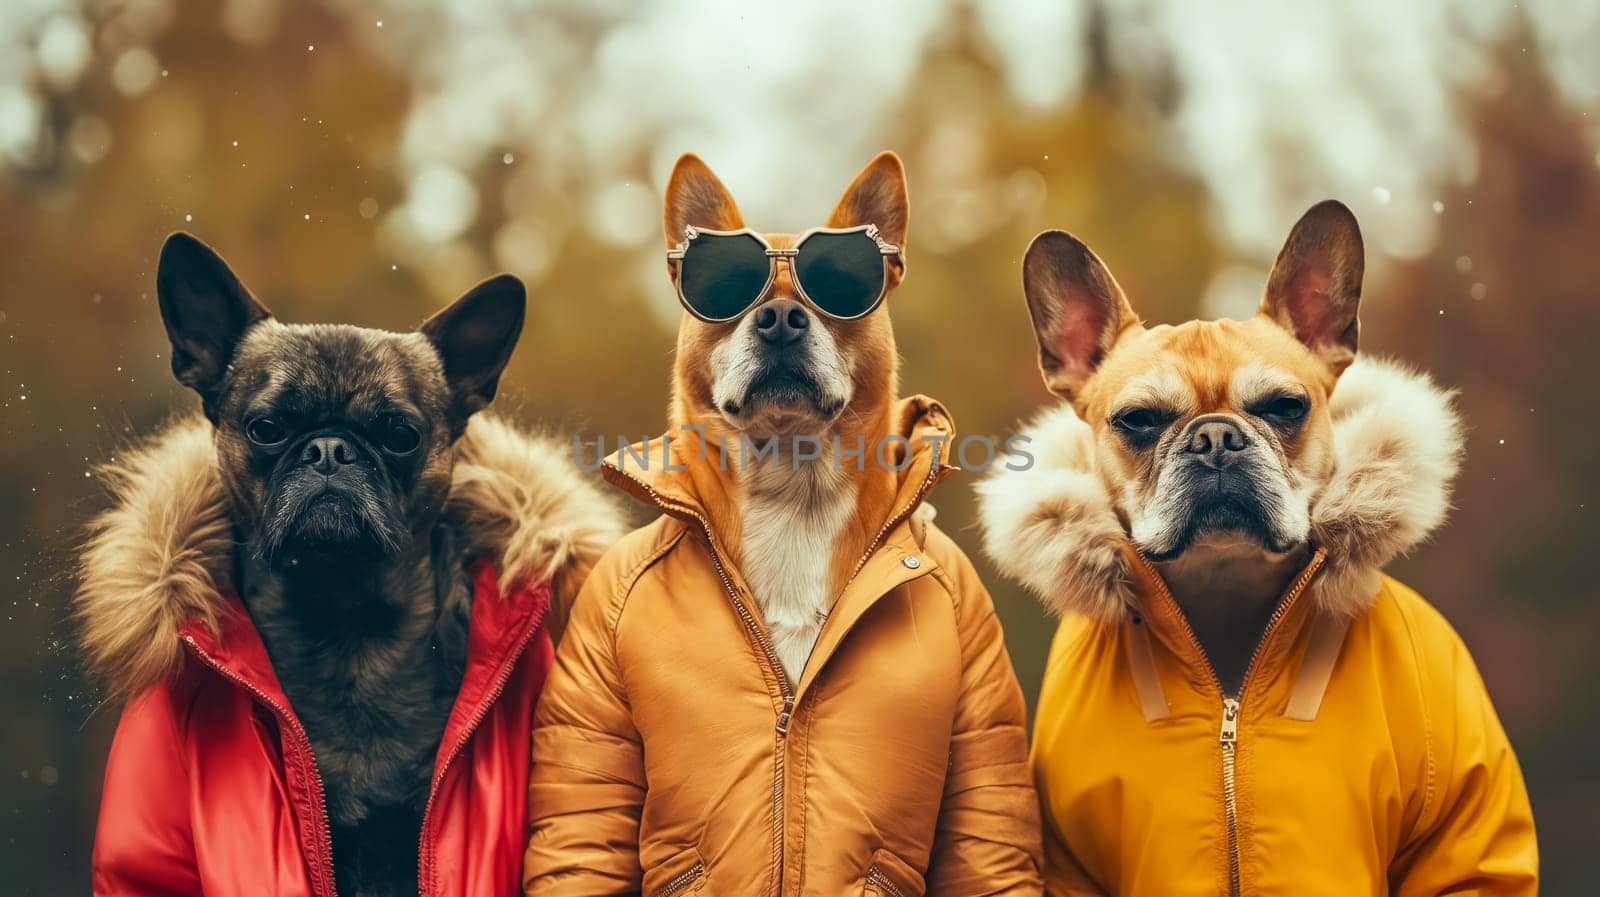 Three dogs wearing jackets and sunglasses pose for a photo. The dogs are wearing different colored jackets and sunglasses, and they appear to be enjoying the photo. Scene is lighthearted and fun. Generative AI